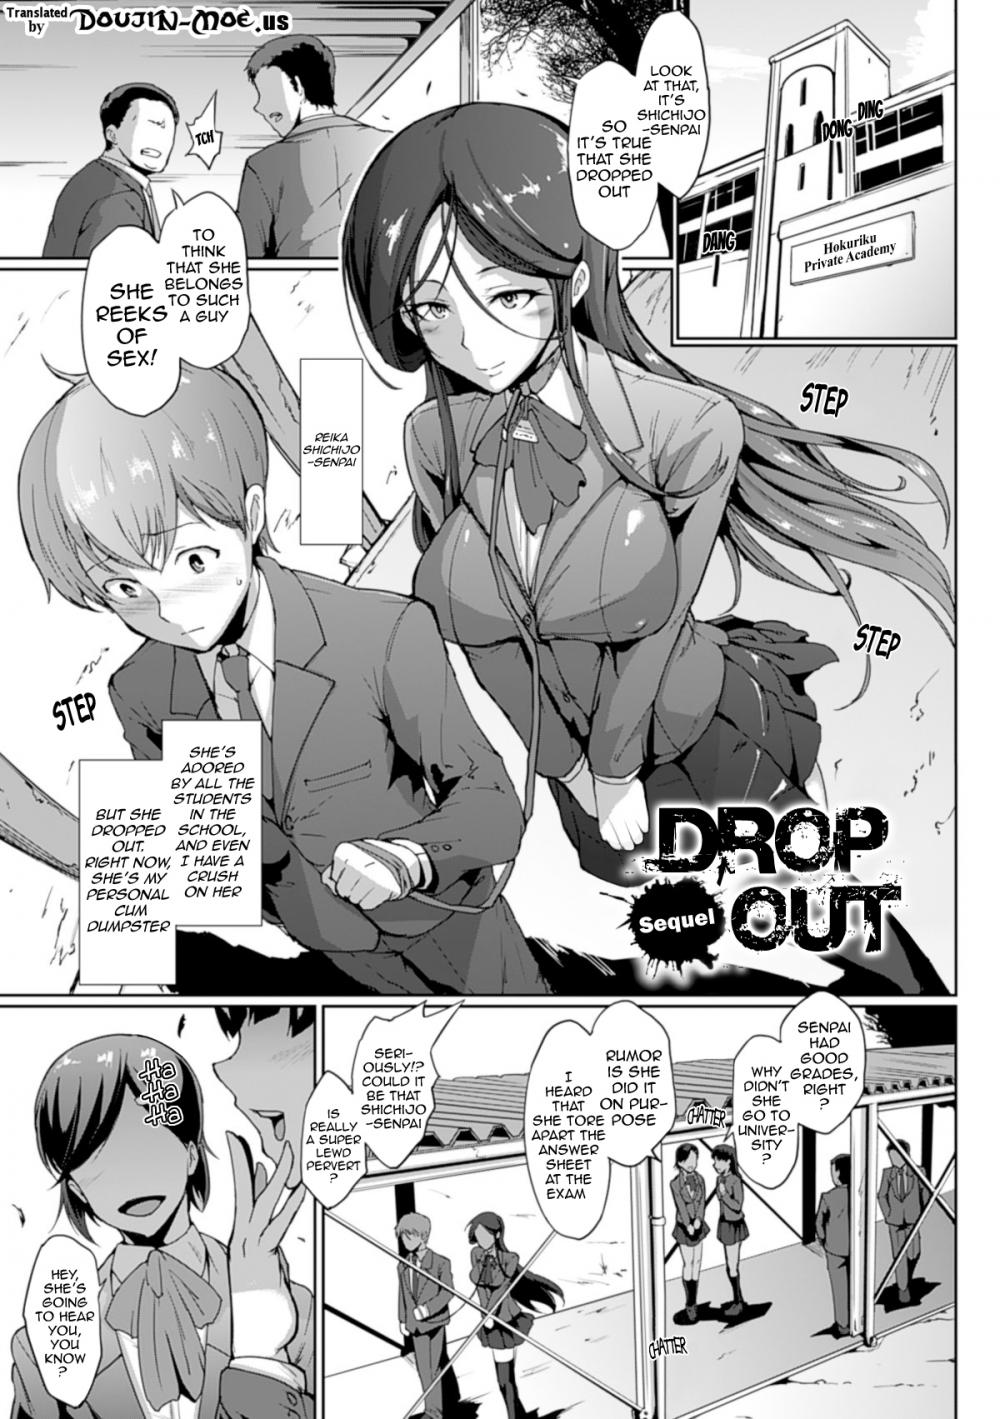 Drop out 2 hentai